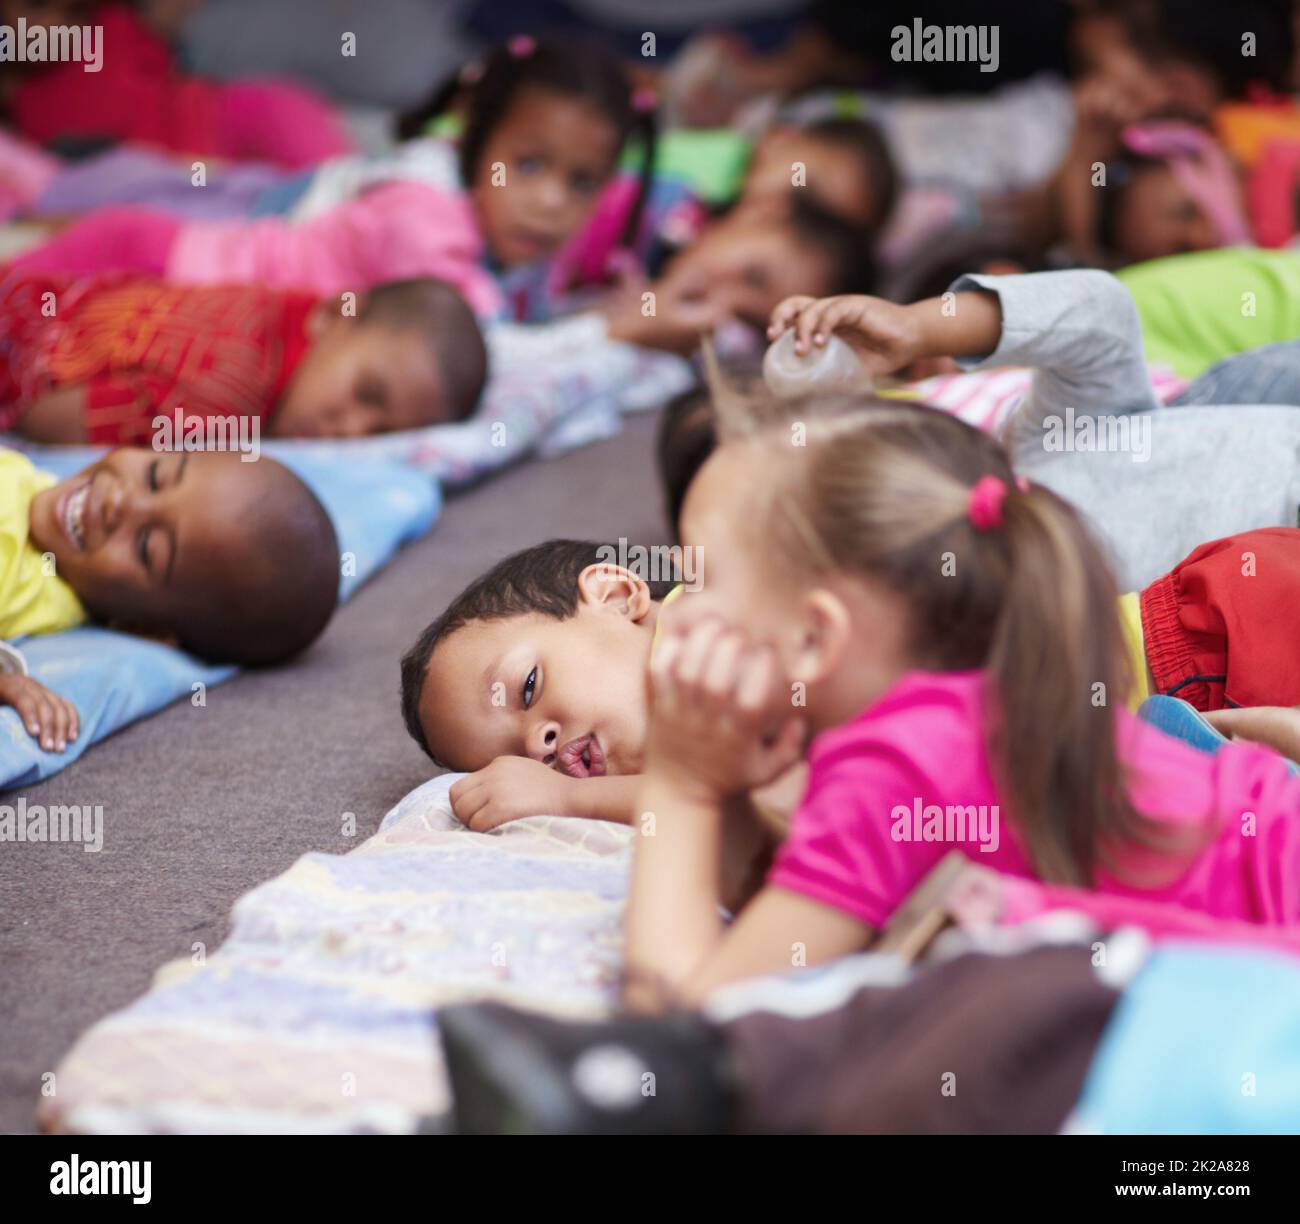 Nap-time. Preschool children all lying down and getting ready for bed. Stock Photo